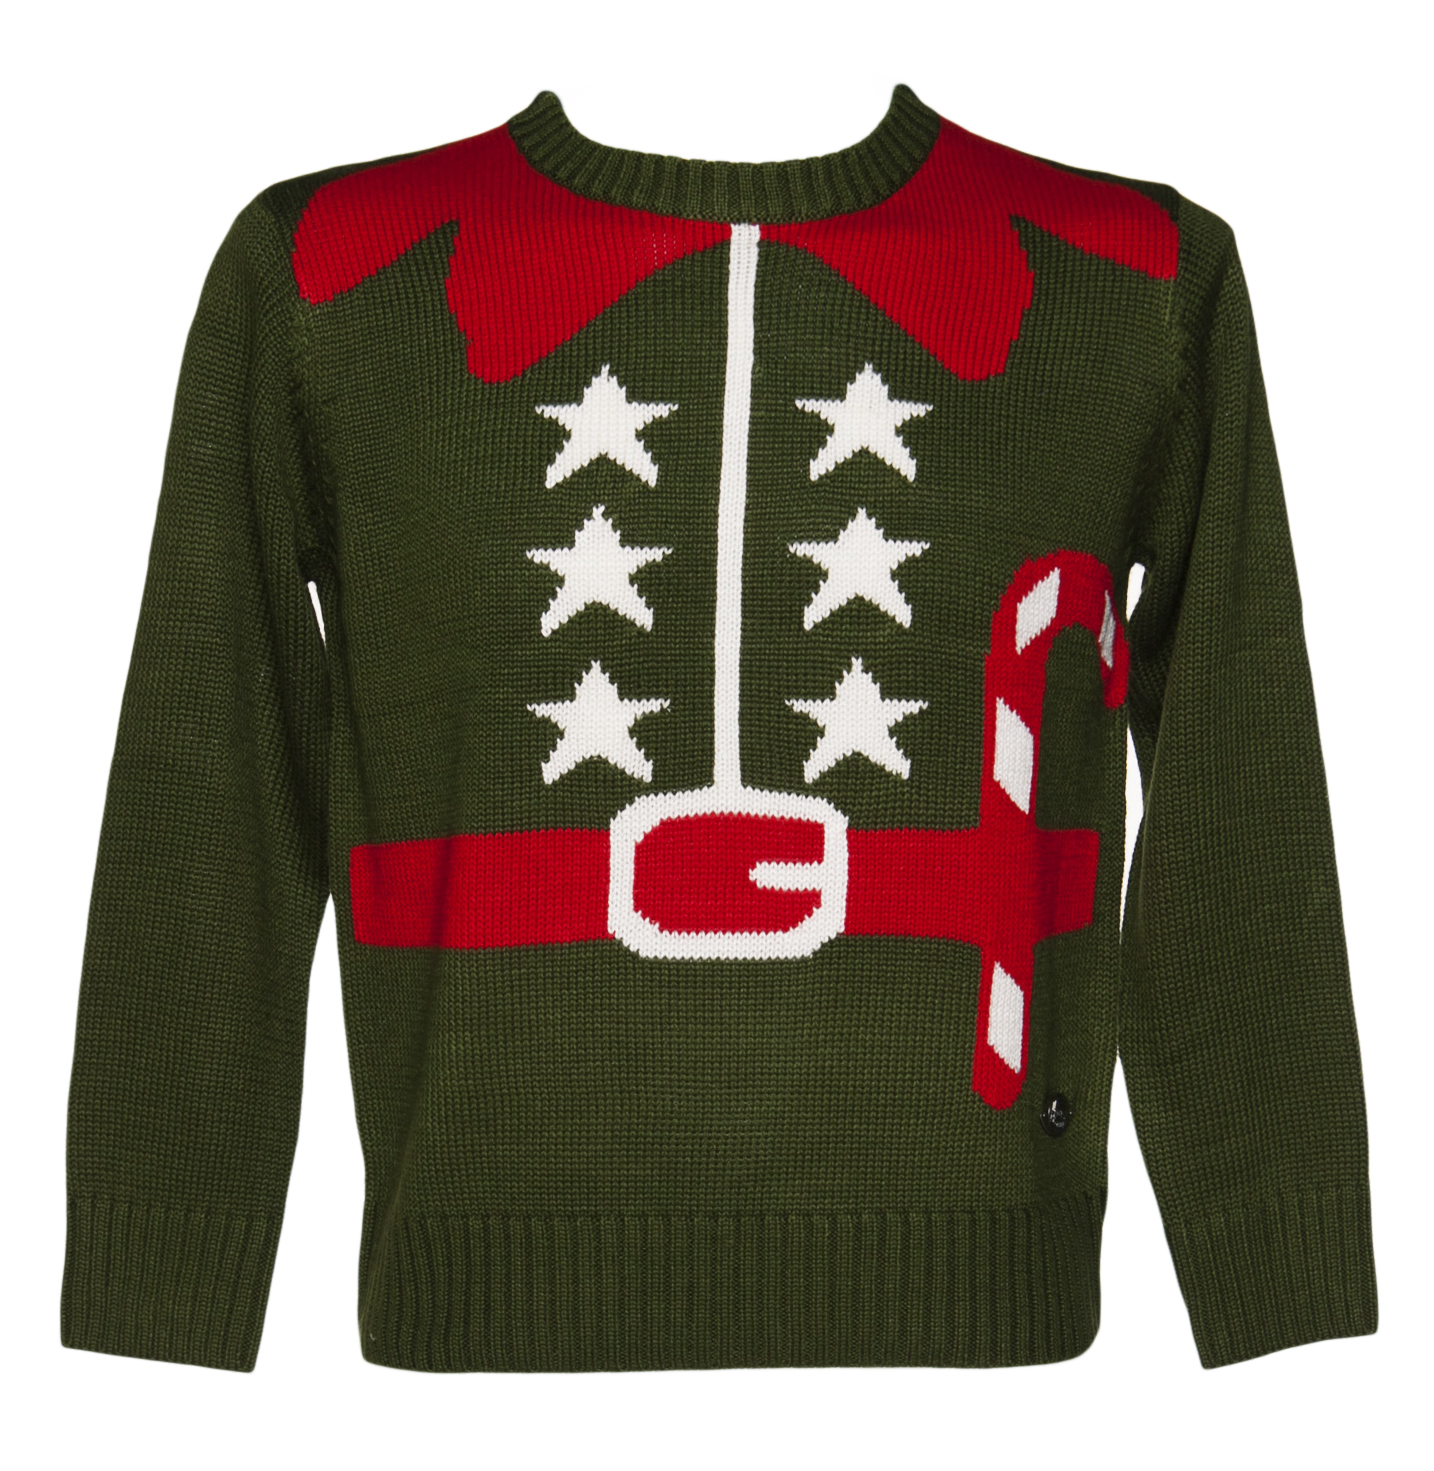 Unisex Elf Costume Christmas Jumper from Crazy